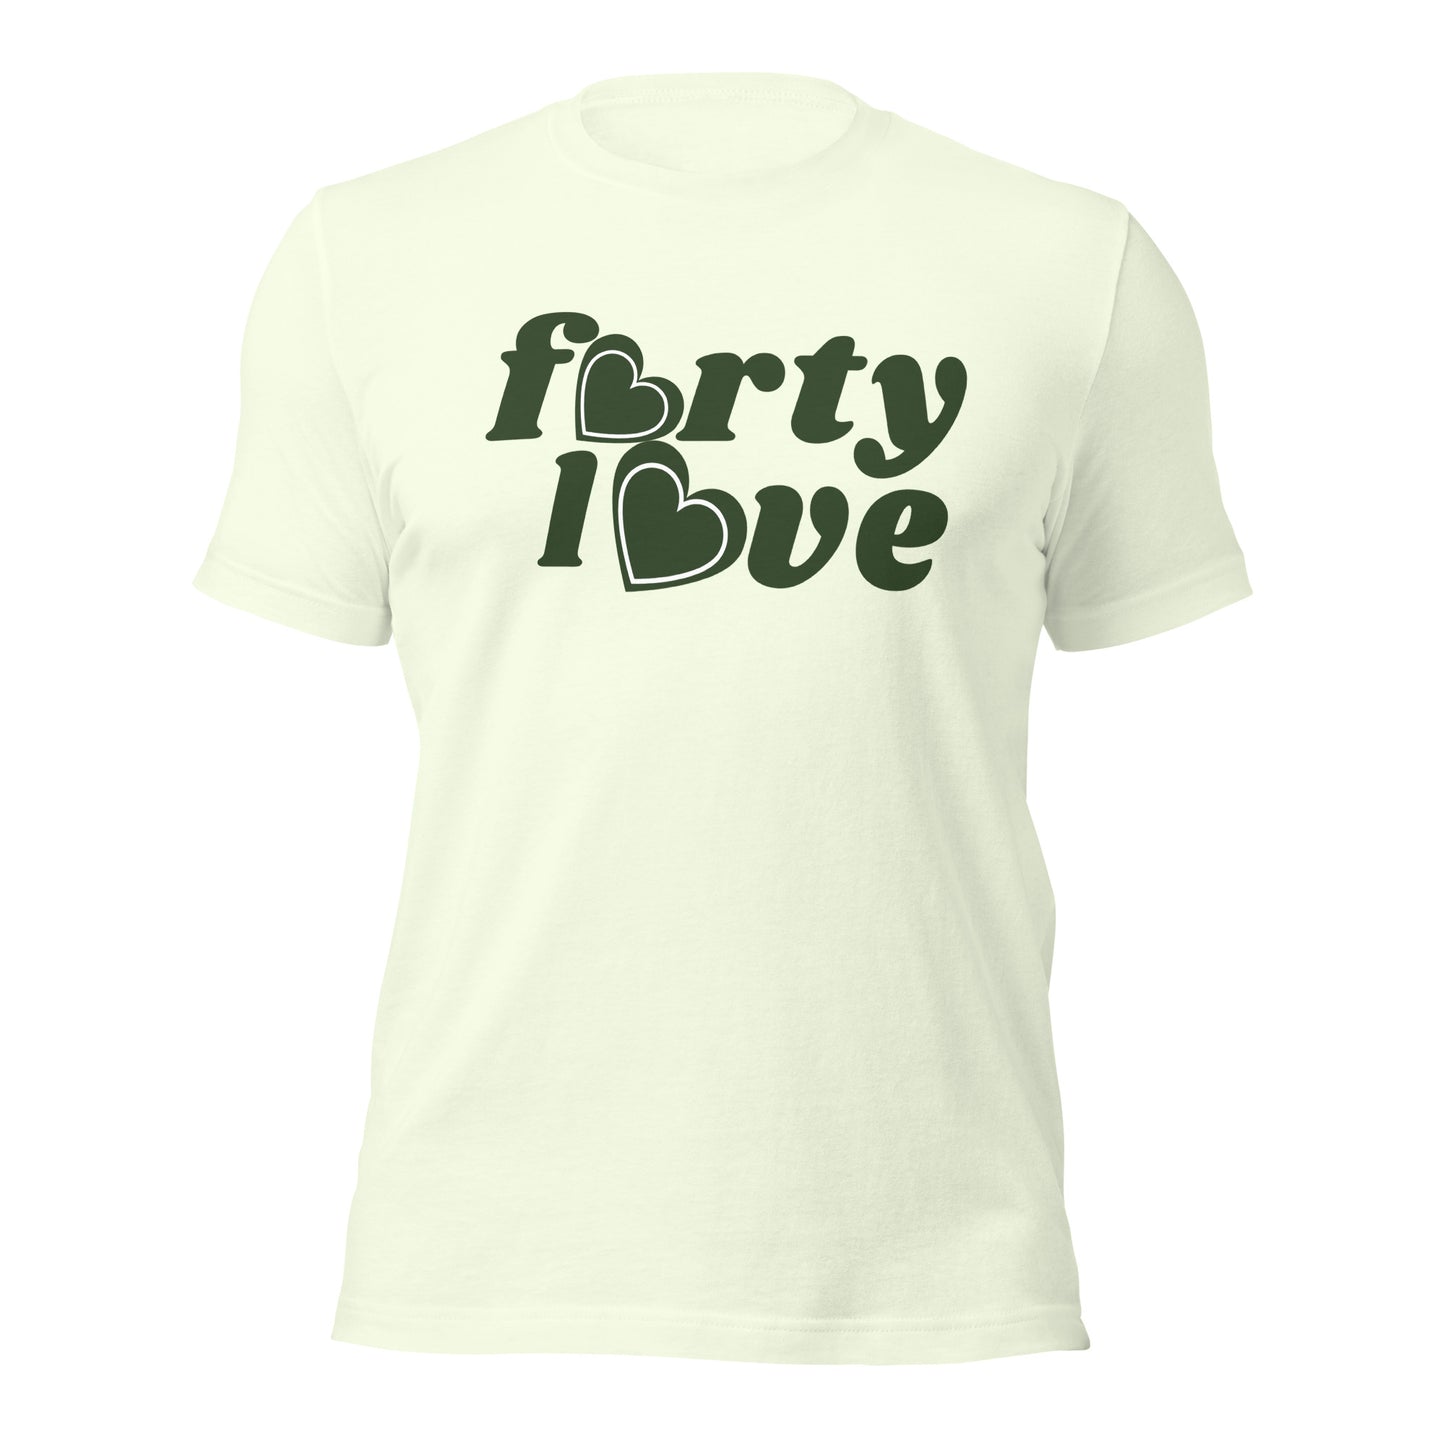 Forty Love